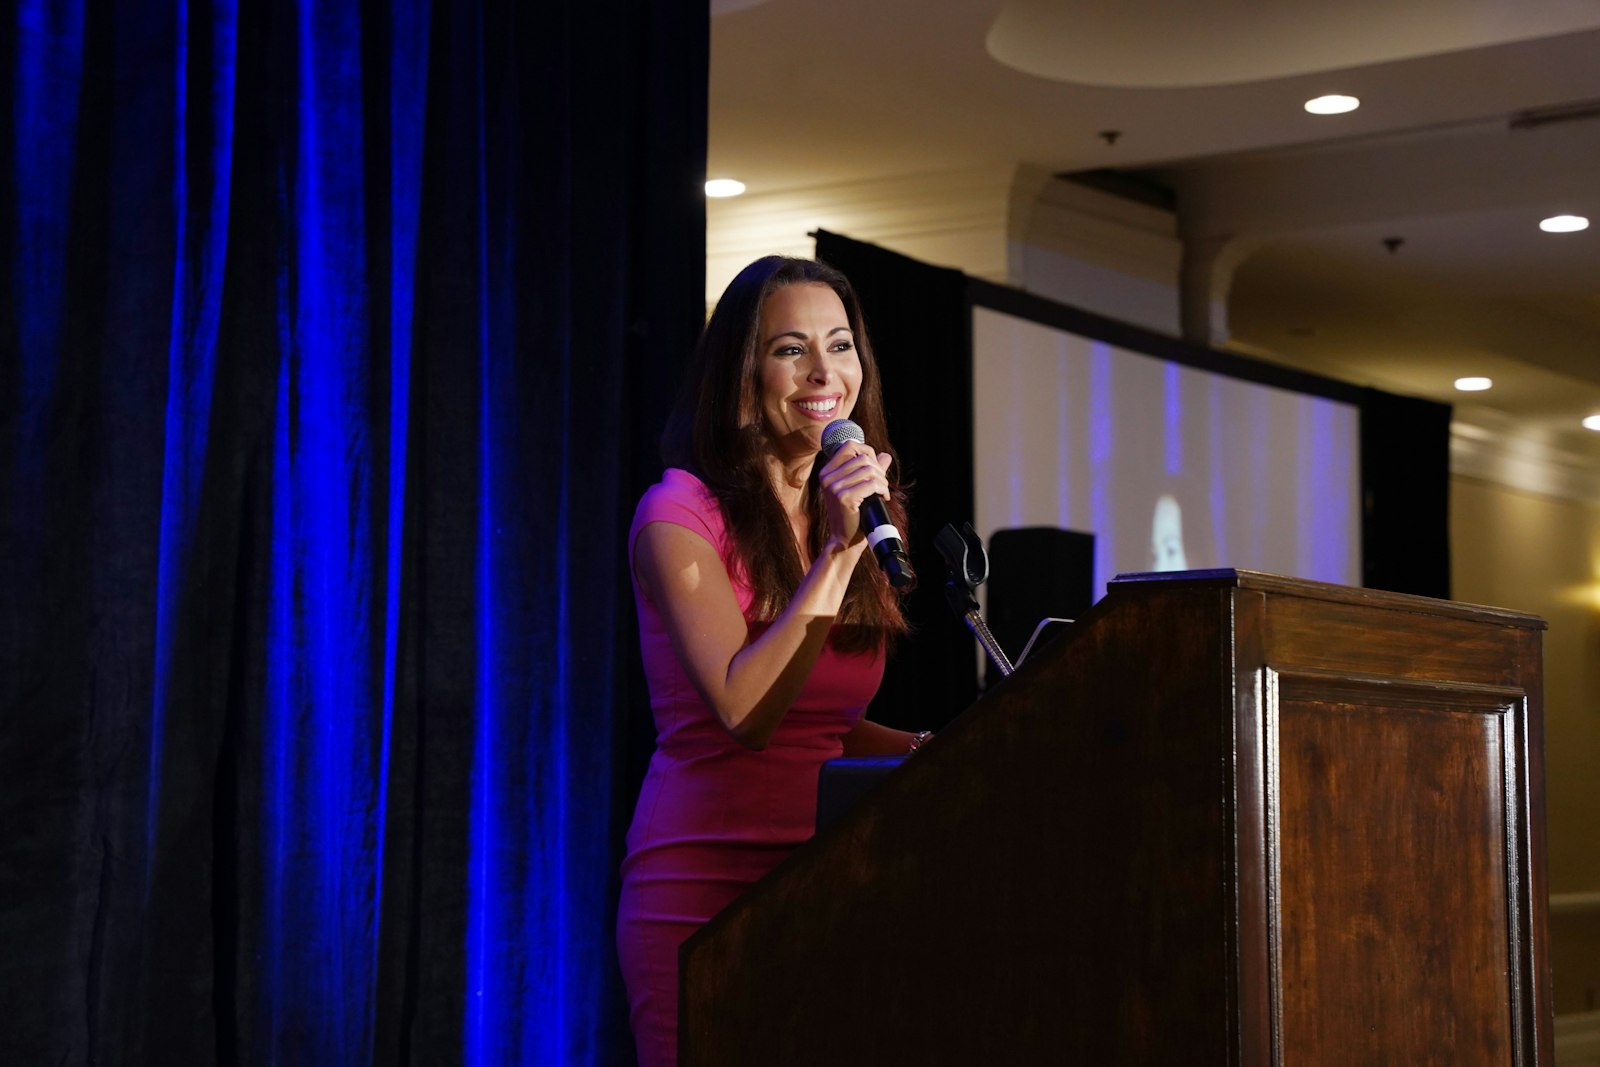 Award-winning actress and television host Joelle Maryn gives the keynote address during the pro-life benefit dinner. Maryn drew parallels between the Gospel and the current fight for life in Michigan, challenging those in attendance to imitate Mary's "yes" in their own lives.